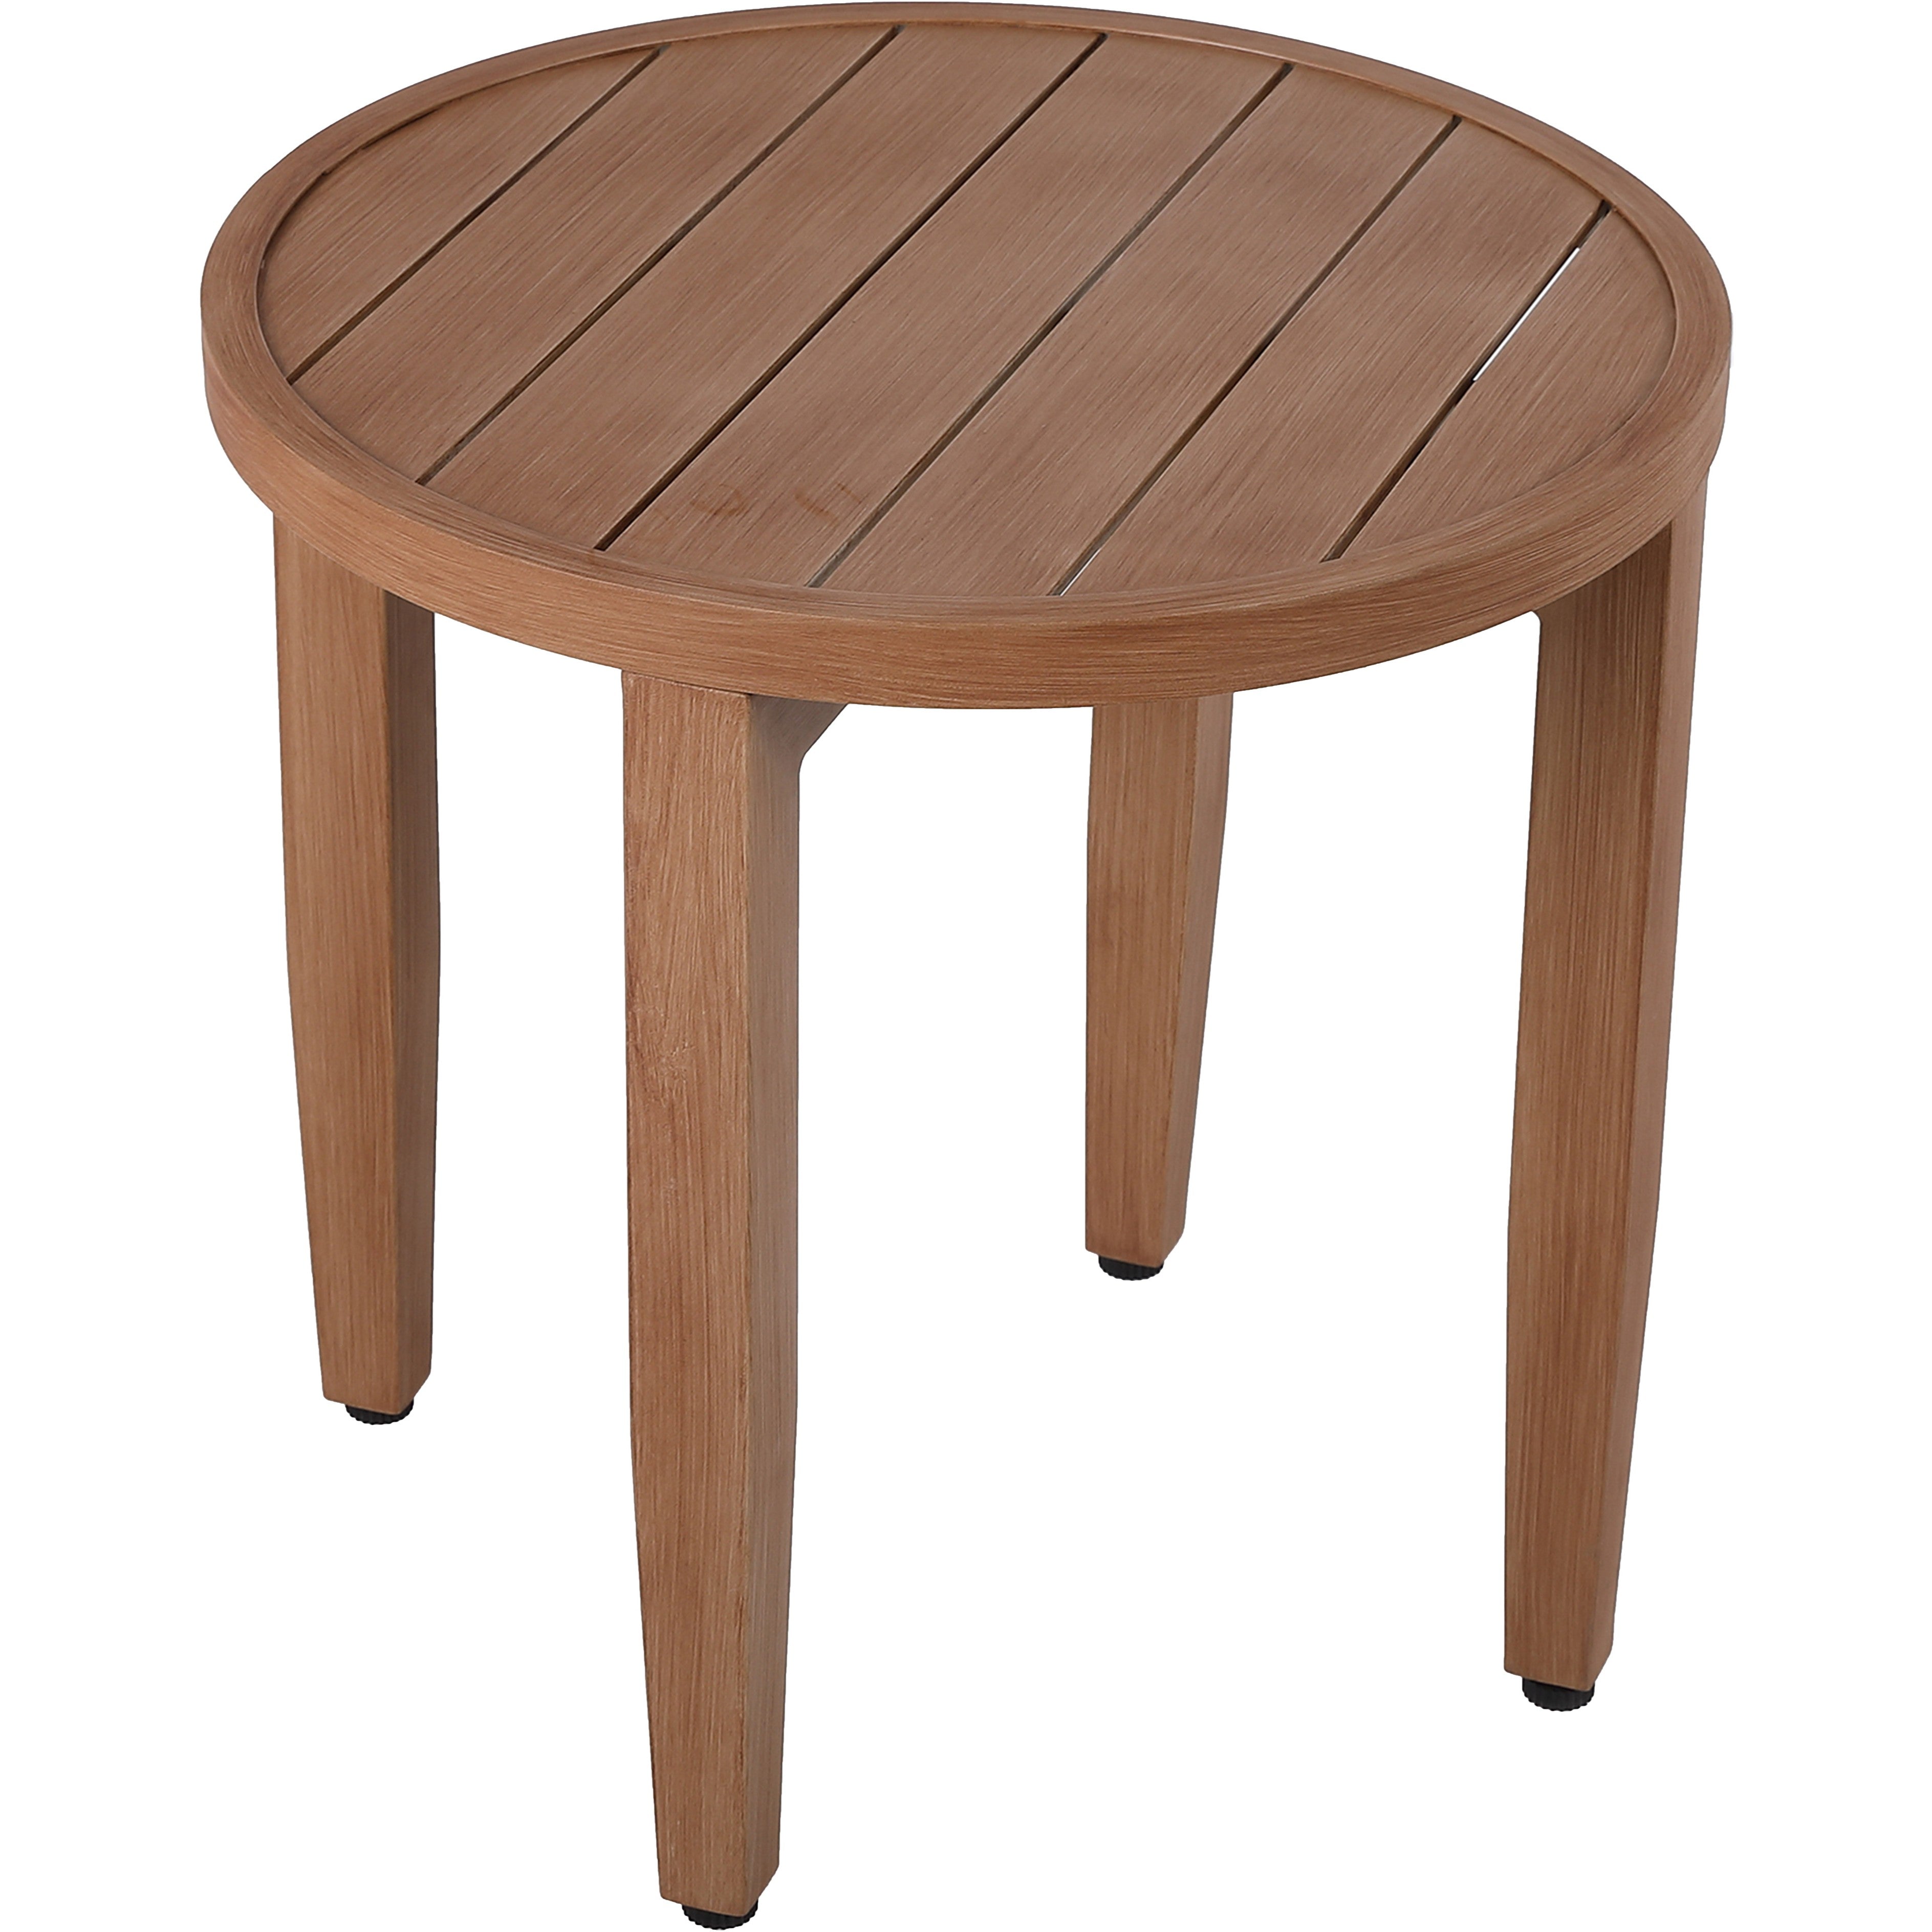 Maui Outdoor Patio End Table - Natural